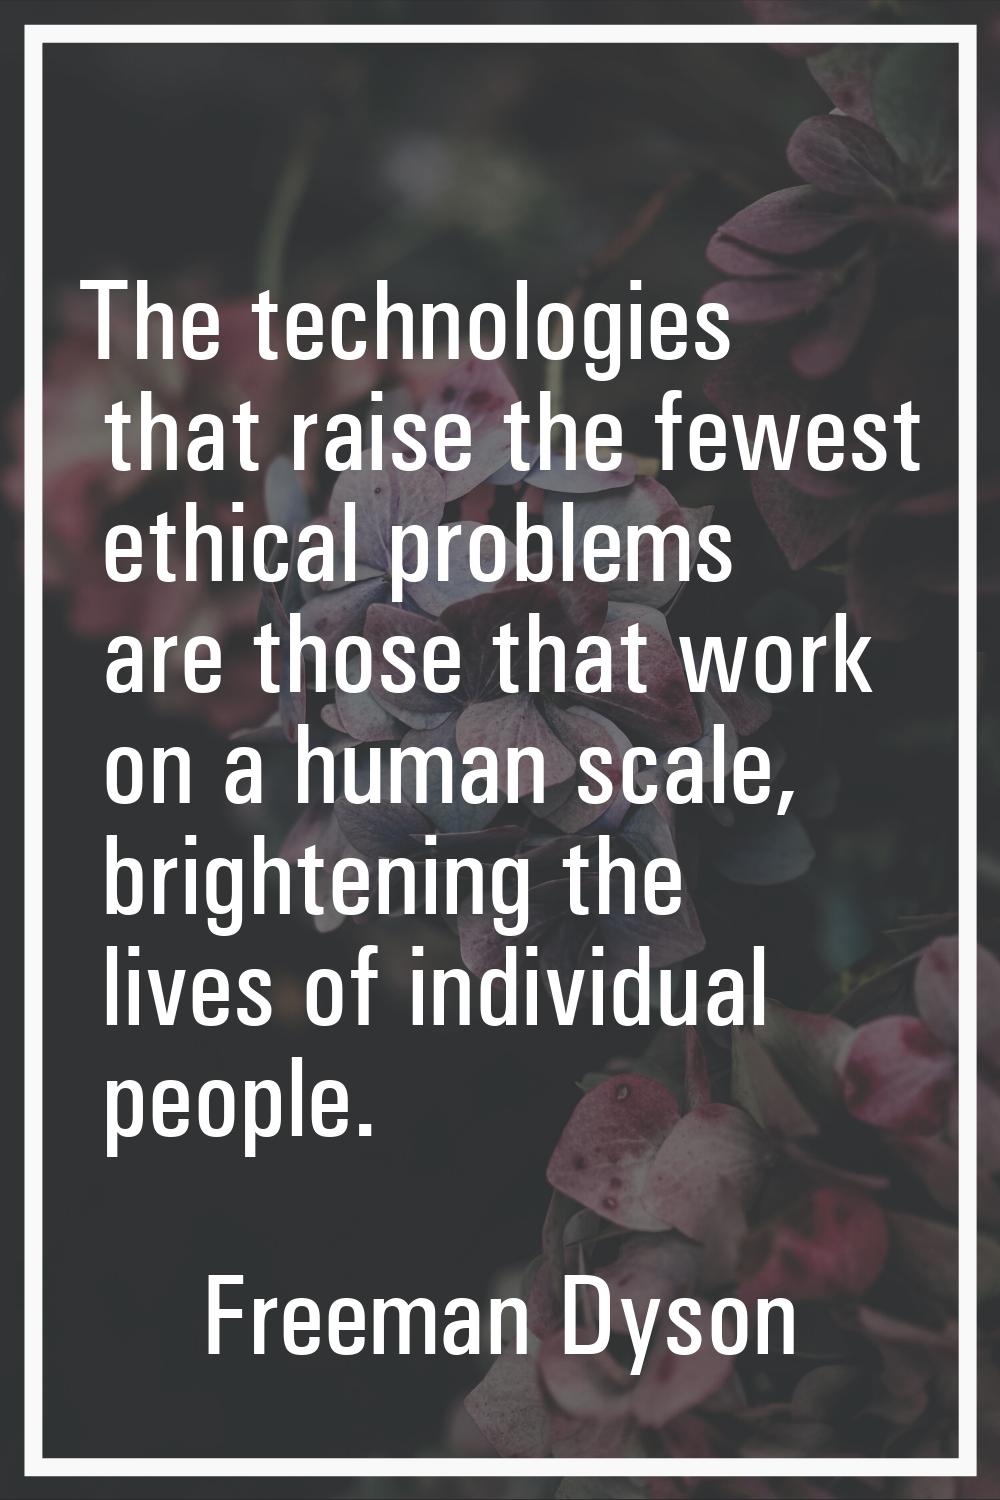 The technologies that raise the fewest ethical problems are those that work on a human scale, brigh